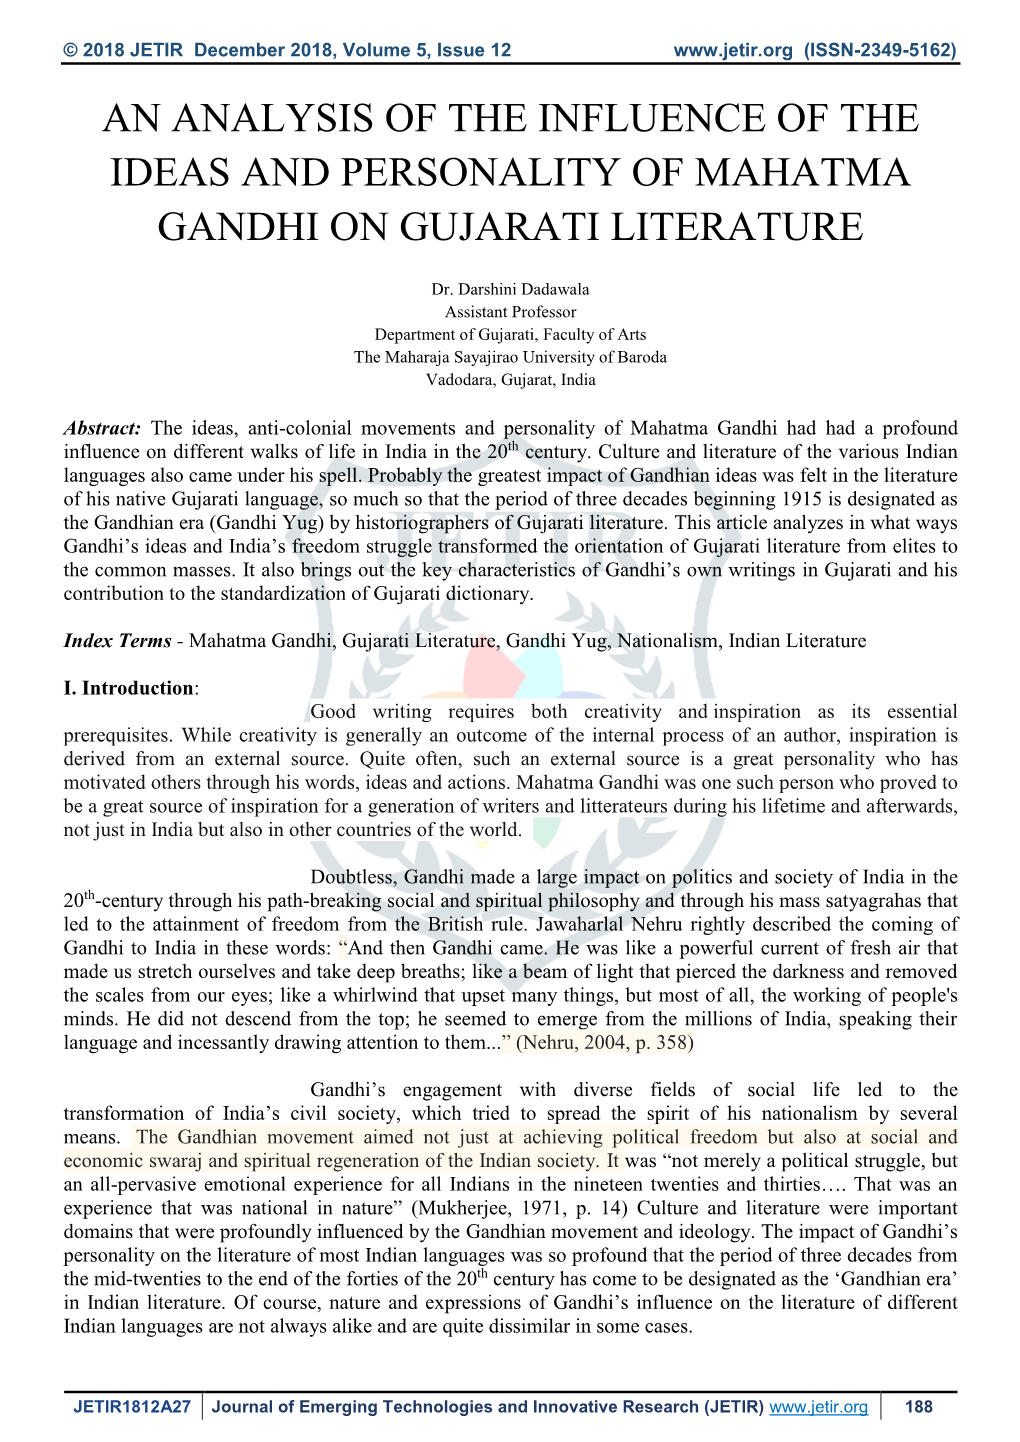 An Analysis of the Influence of the Ideas and Personality of Mahatma Gandhi on Gujarati Literature